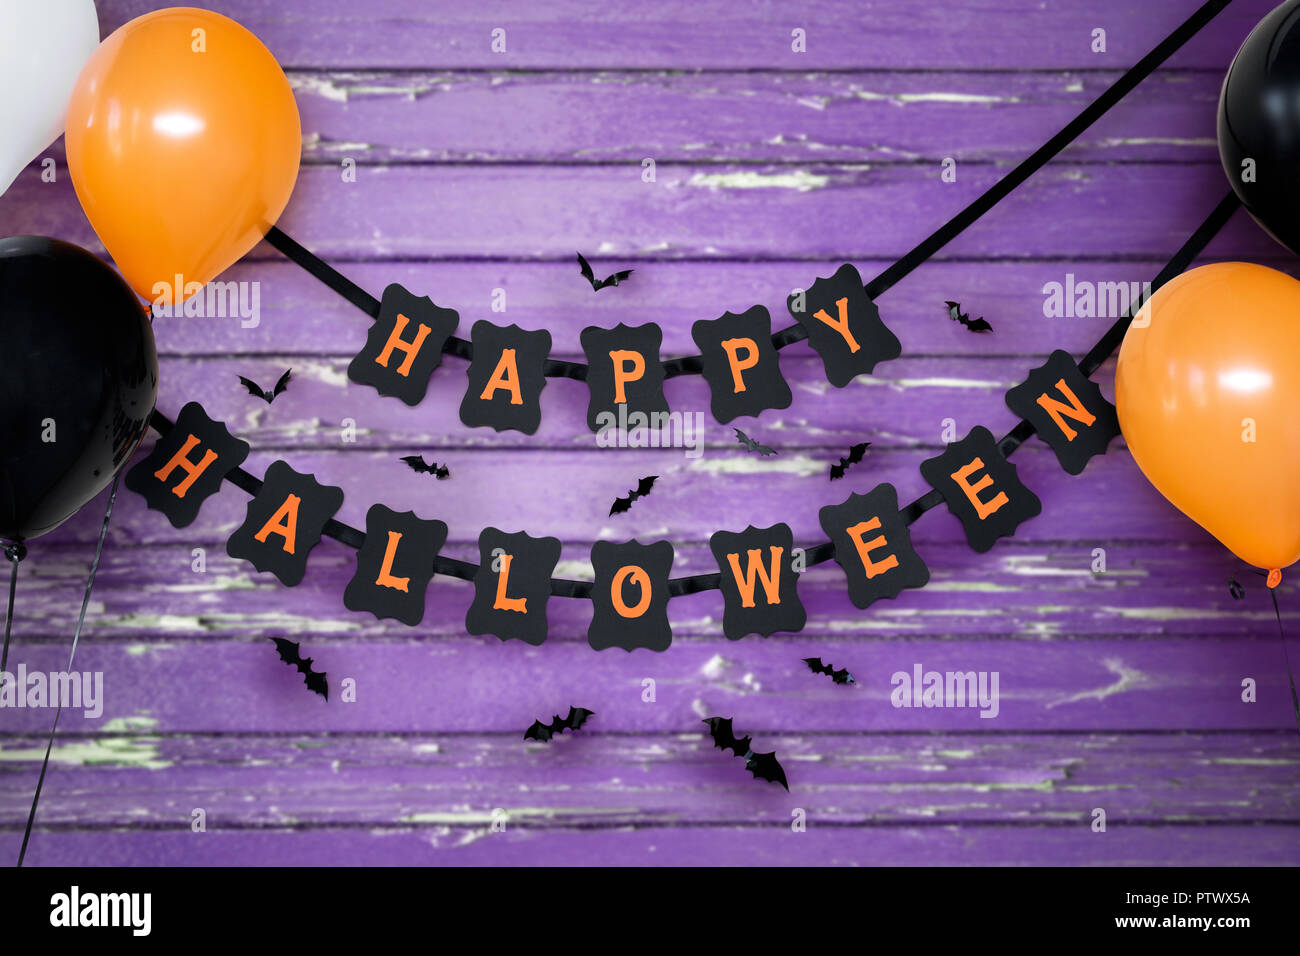 happy halloween party garland and balloons Stock Photo